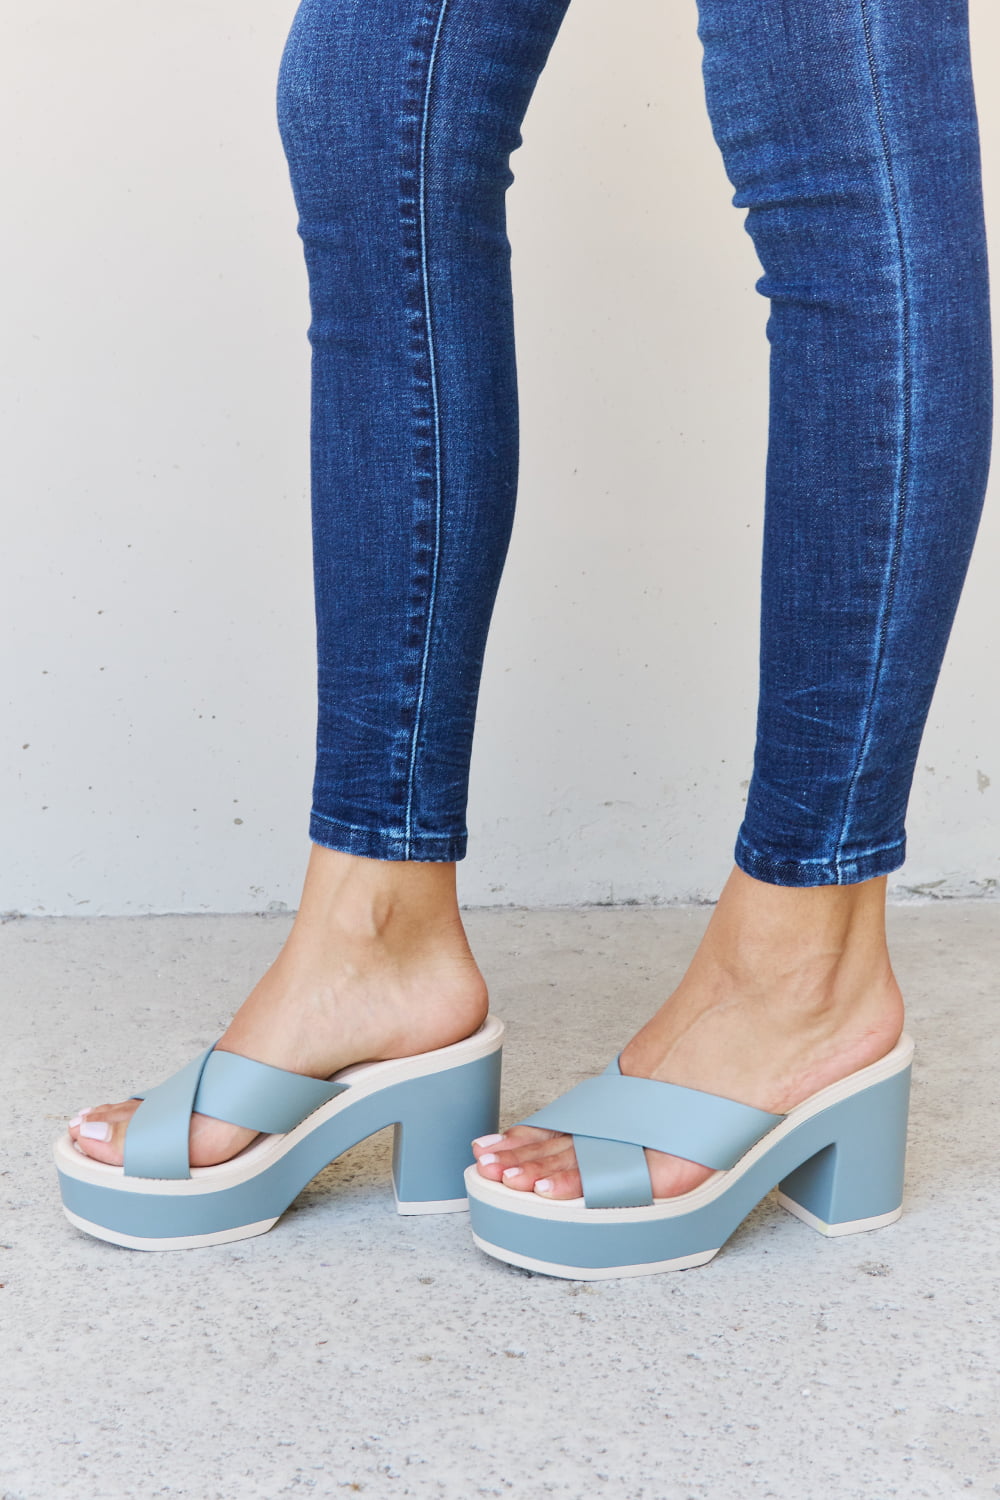 Light Gray Weeboo Cherish The Moments Contrast Platform Sandals in Misty Blue Sentient Beauty Fashions Shoes